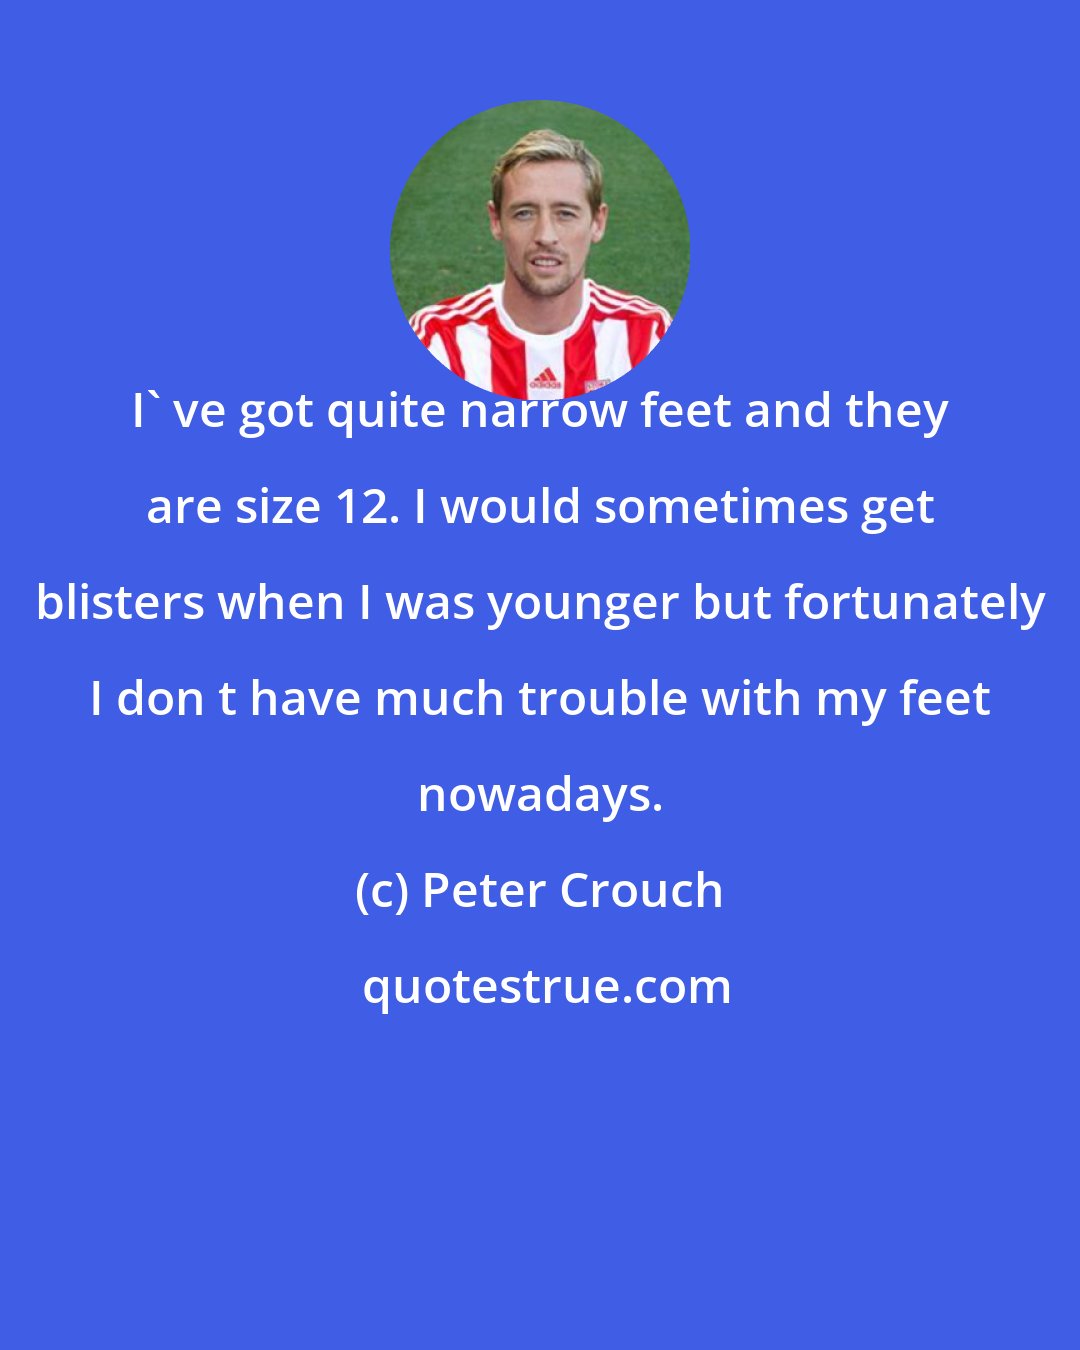 Peter Crouch: I' ve got quite narrow feet and they are size 12. I would sometimes get blisters when I was younger but fortunately I don t have much trouble with my feet nowadays.